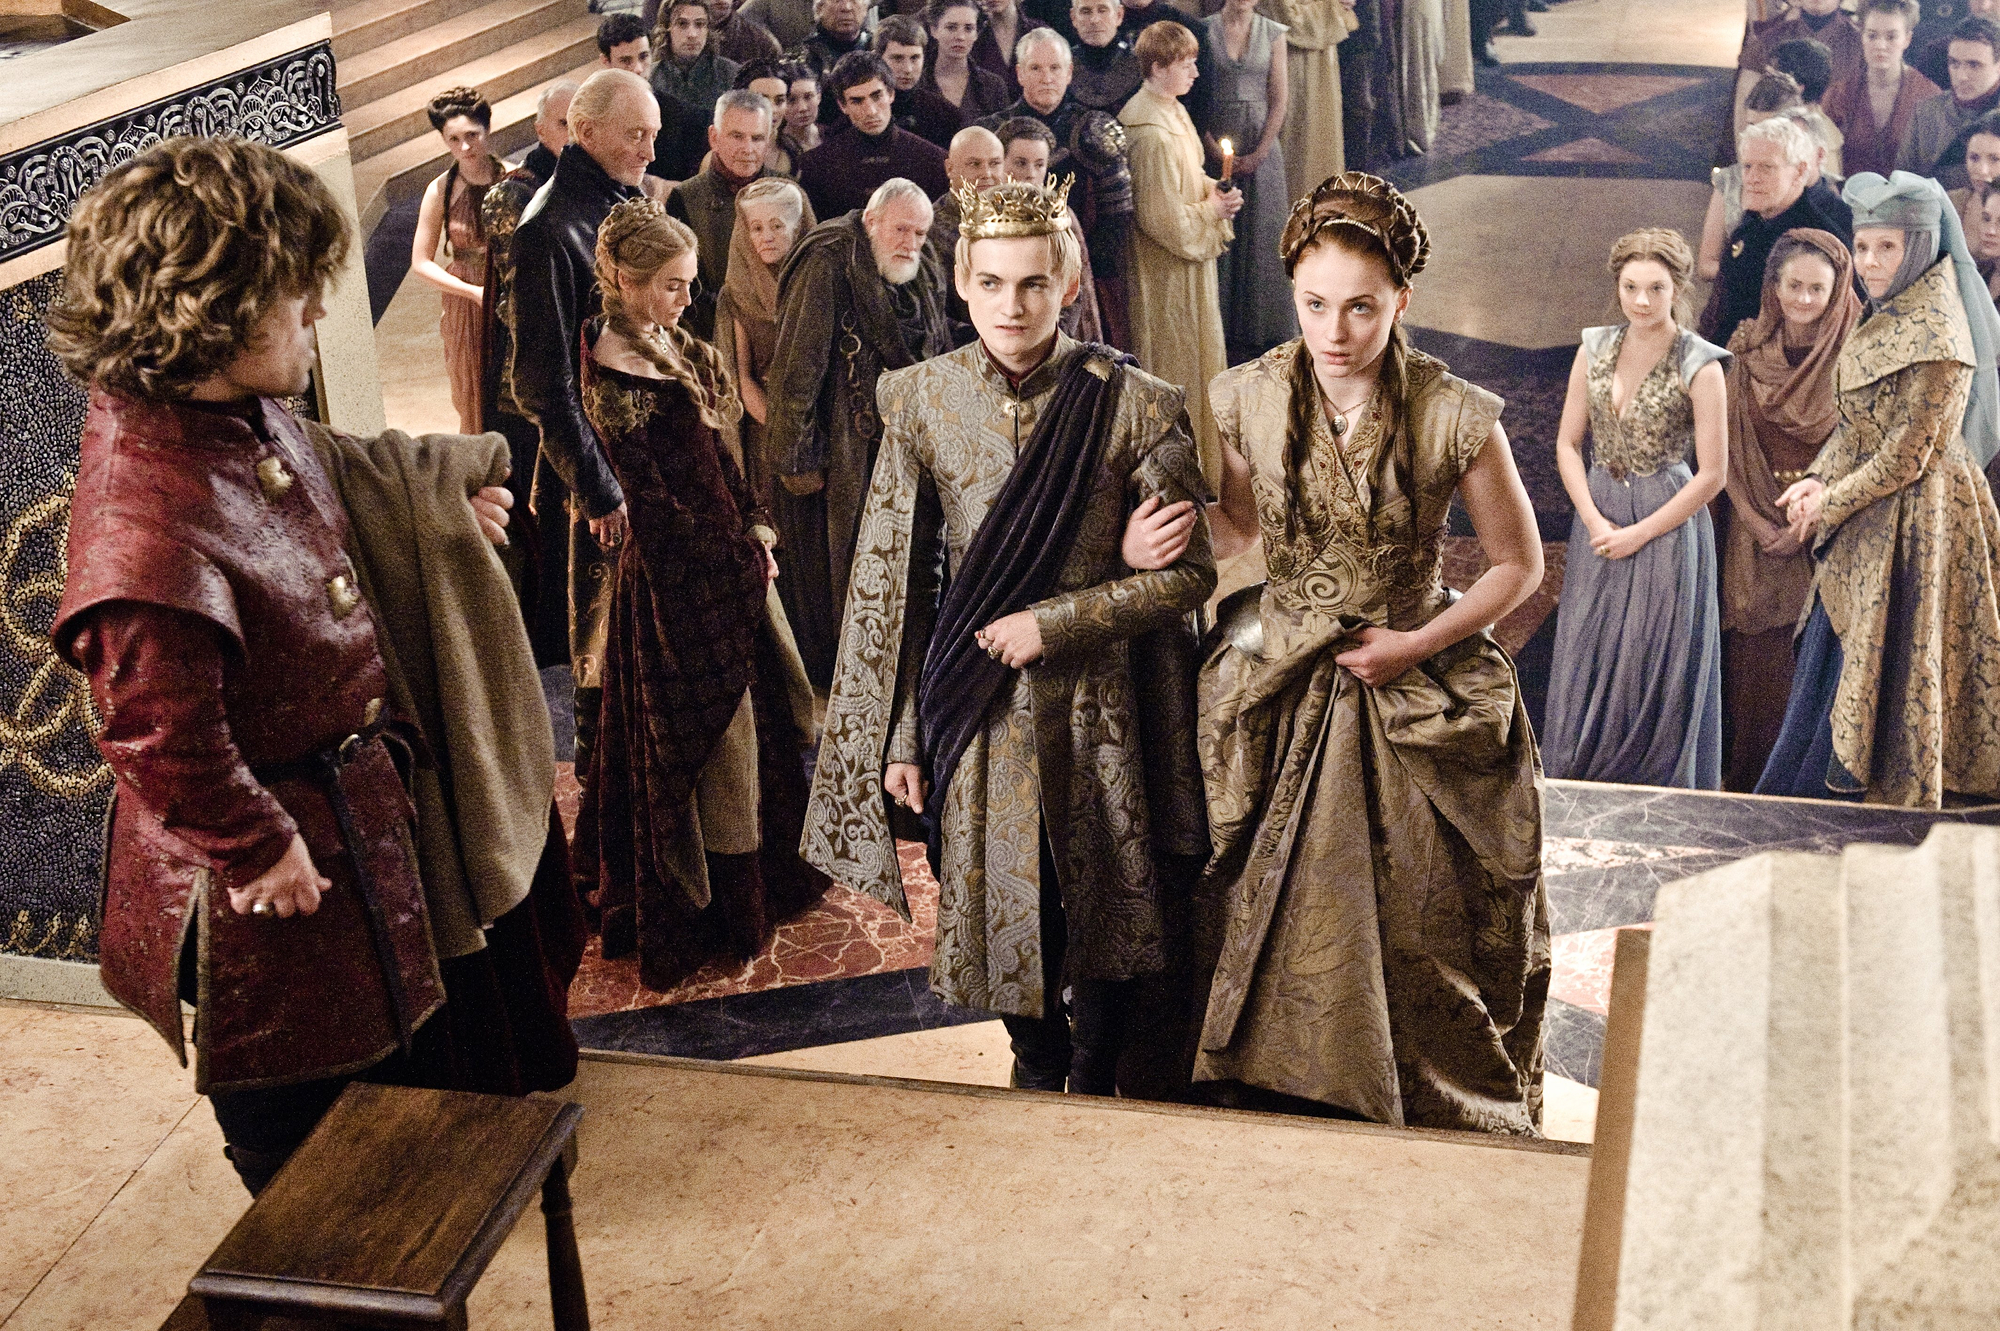 tv show, game of thrones, cersei lannister, joffrey baratheon, lord varys, margaery tyrell, olenna tyrell, pycelle (game of thrones), sansa stark, tyrion lannister, tywin lannister